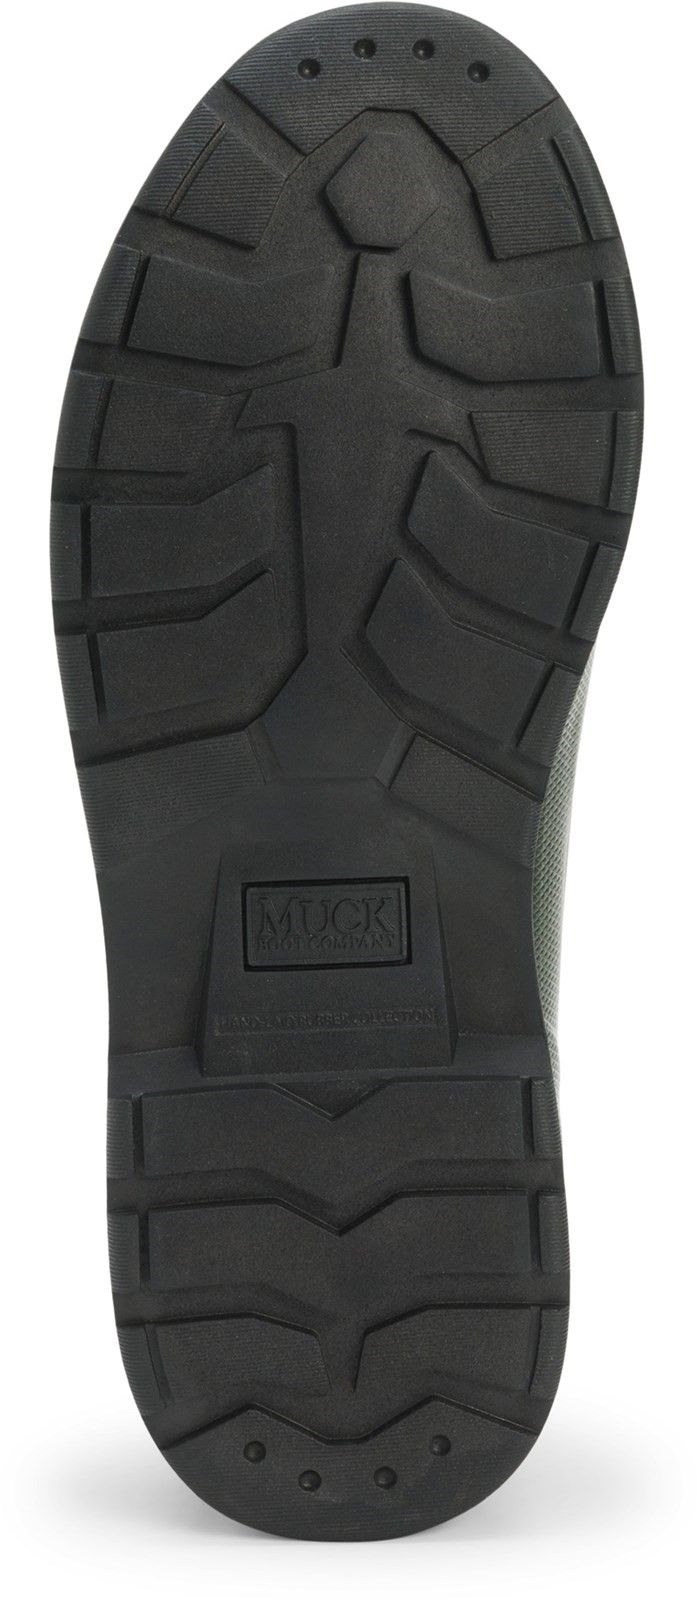 Inspired by our beloved Chore Boot, Muck Originals is a collection of light-duty essential footwear for men and women. Fully lined boots are wrapped in soft, hand-laid rubber for comfortable, 100% waterproof protection.100% Waterproof. 
Fully lined with neoprene for flexibility. 
Exposed collar for added comfort. 
Moulded PU footbed with memory foam for underfoot comfort. 
Nzyme antimicrobial treatment for odour control.